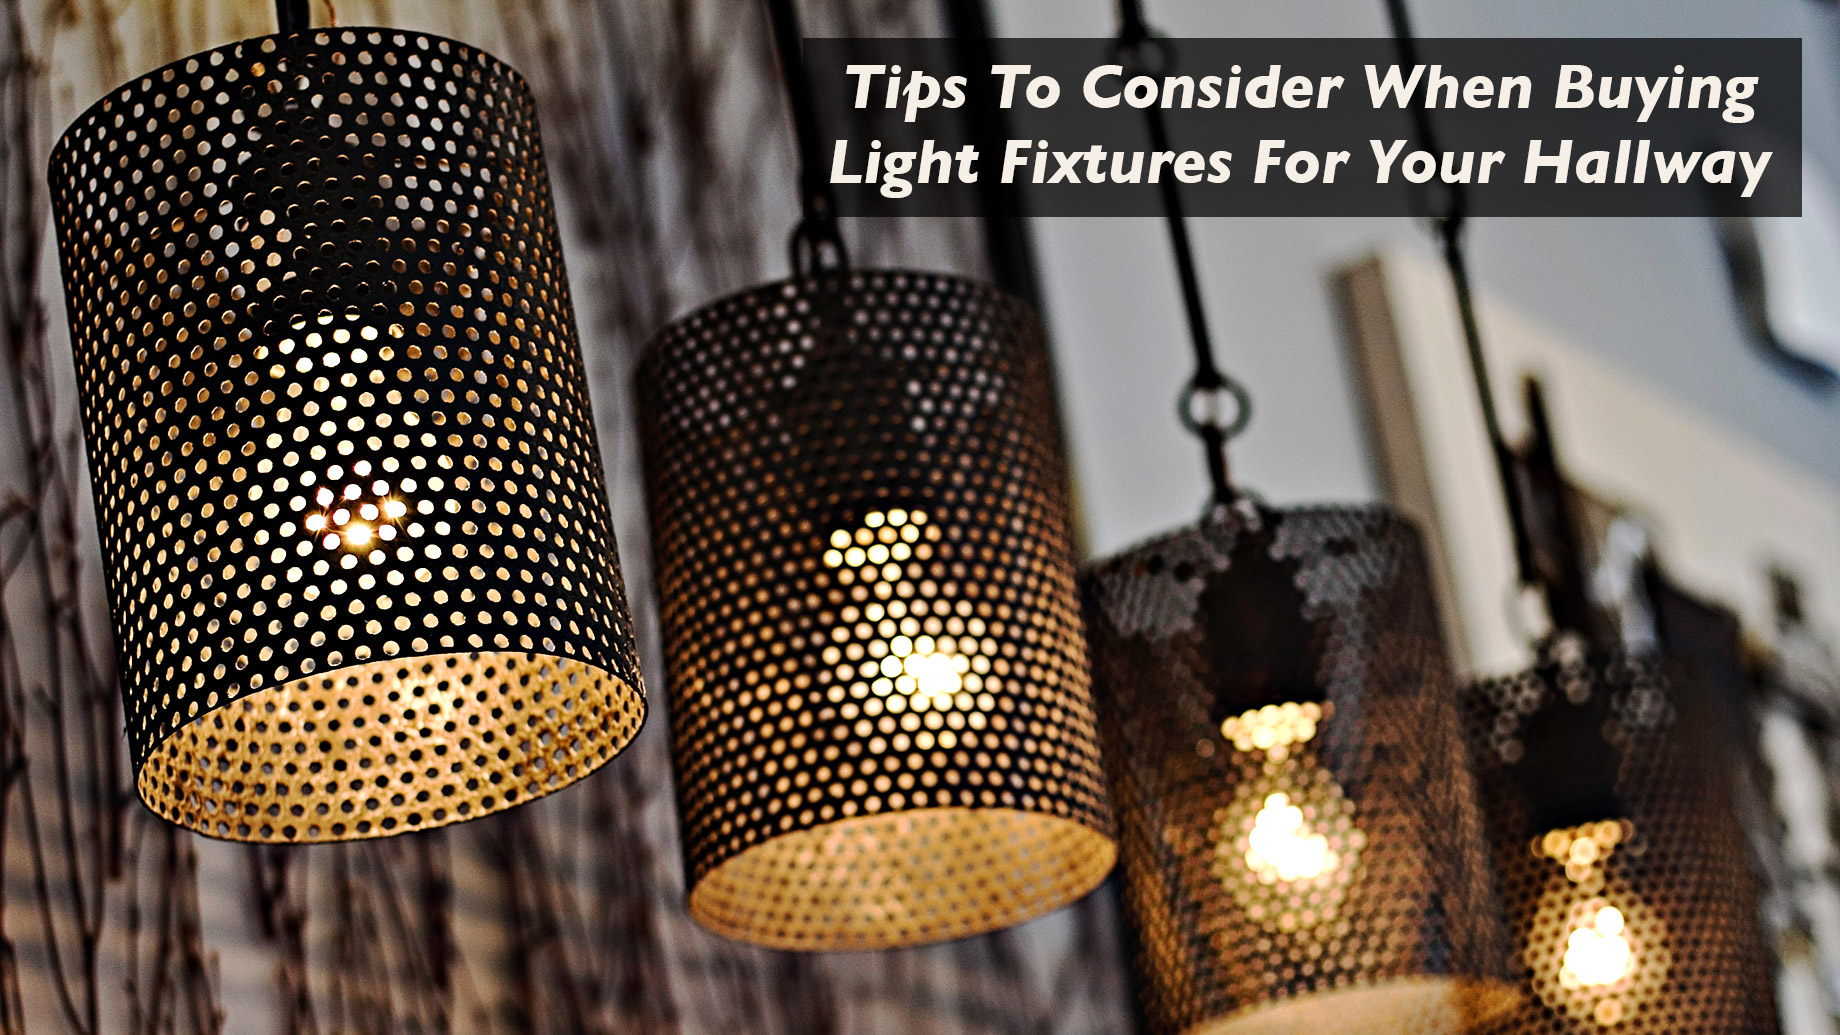 Interior Design - Tips To Consider When Buying Light Fixtures For Your Hallway